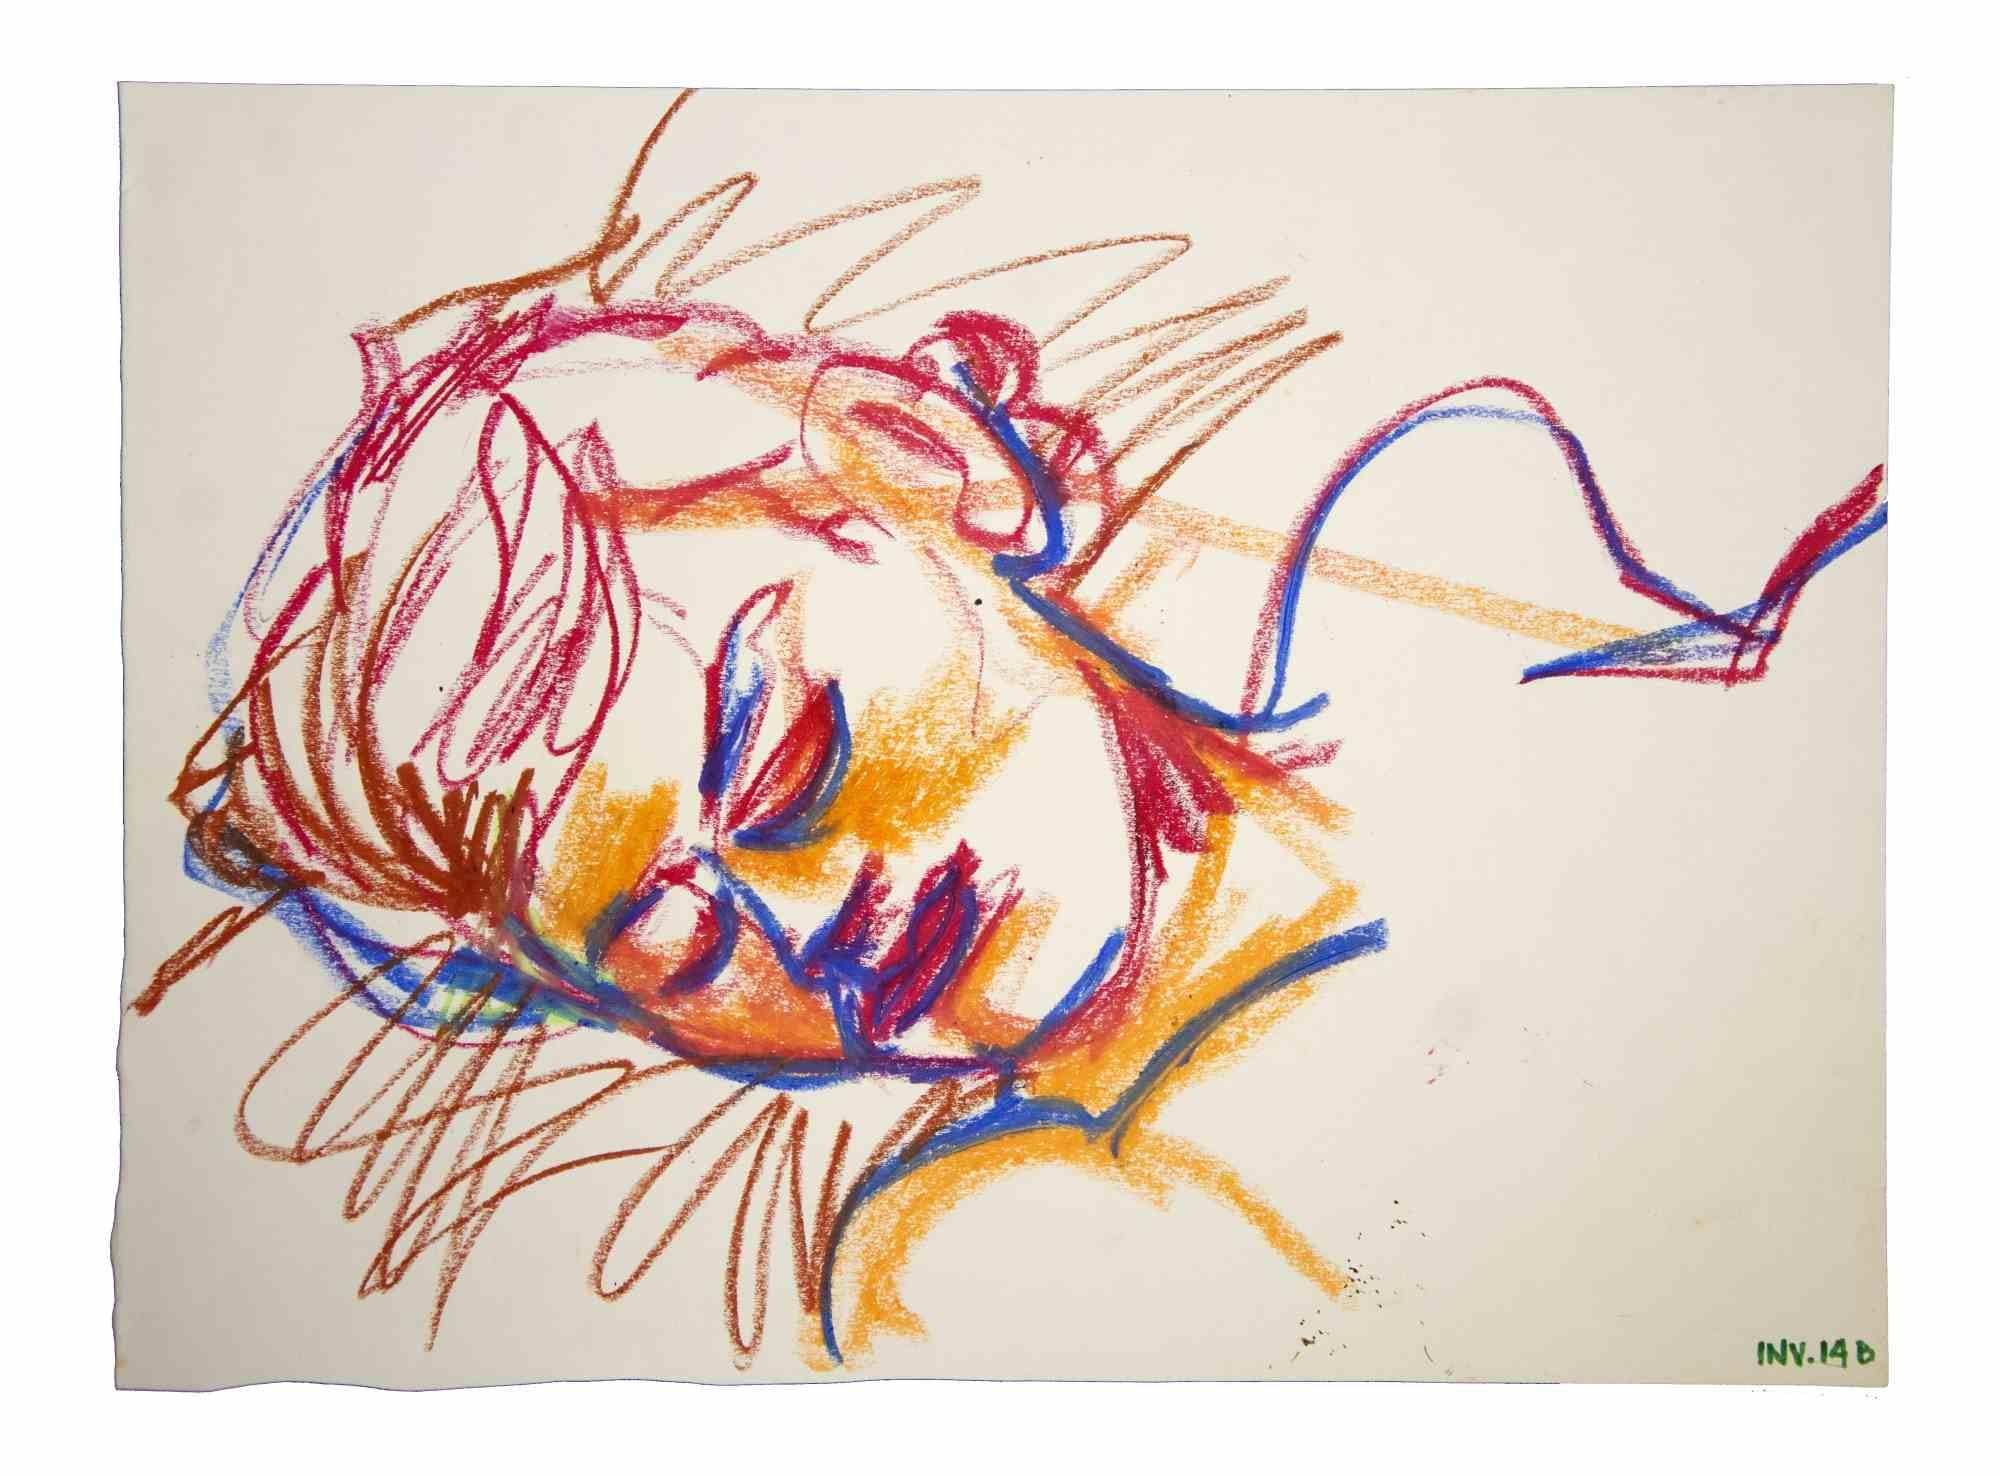 Female Figure is an original artwork realized in the 1970s by the Italian Contemporary artist  Leo Guida  (1992 - 2017).

Original drawings in oil pastel on paper.

Good conditions but aged.

The artwork is depicted through strong strokes in